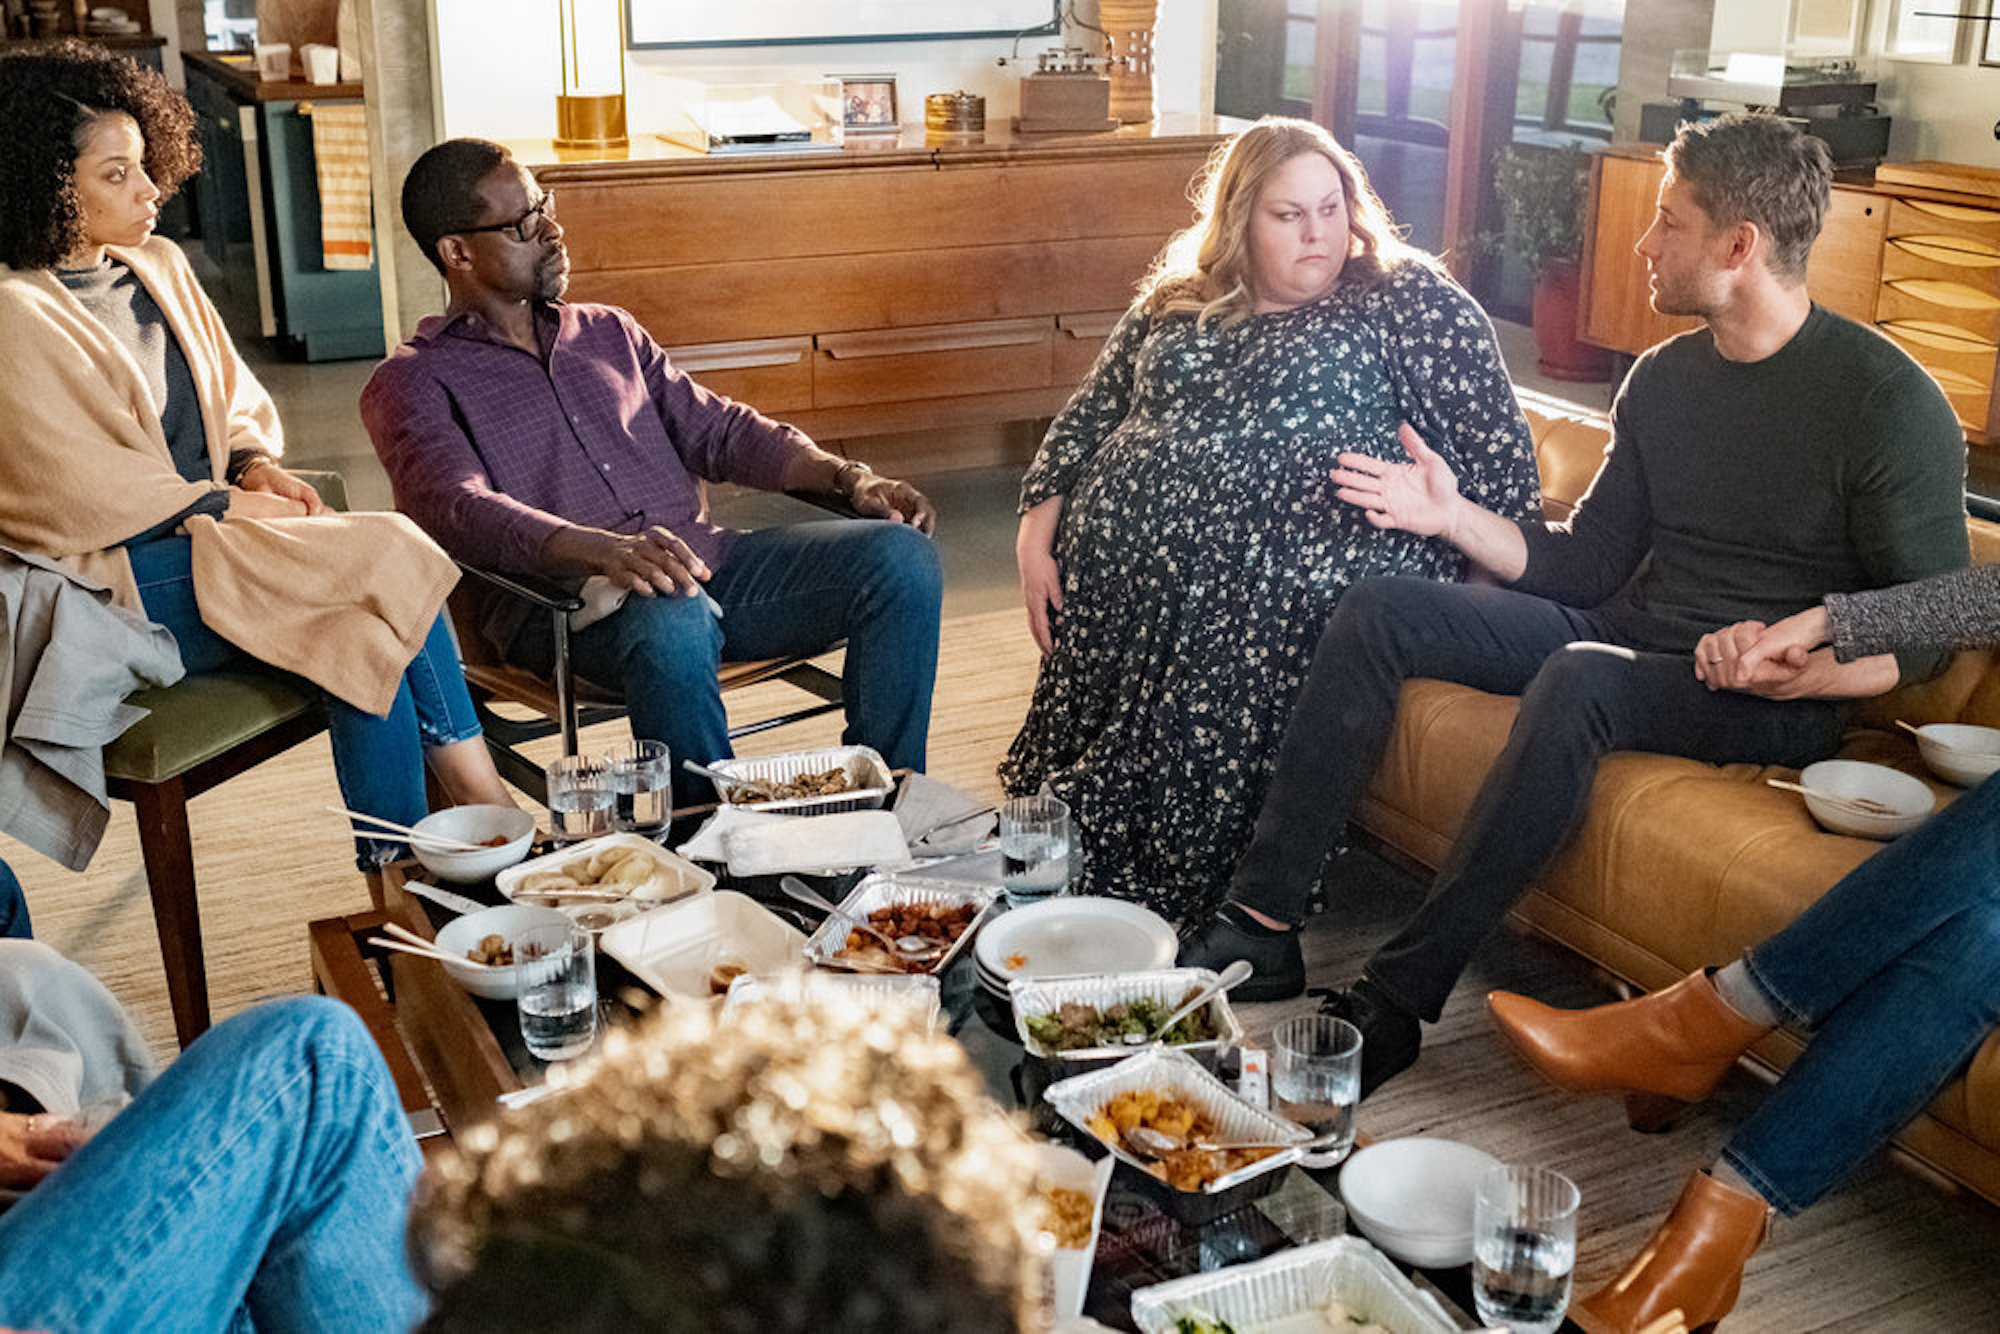 Beth, Randall, Kate, and Kevin sitting together on couches in 'This Is Us' Season 6 Episode 16